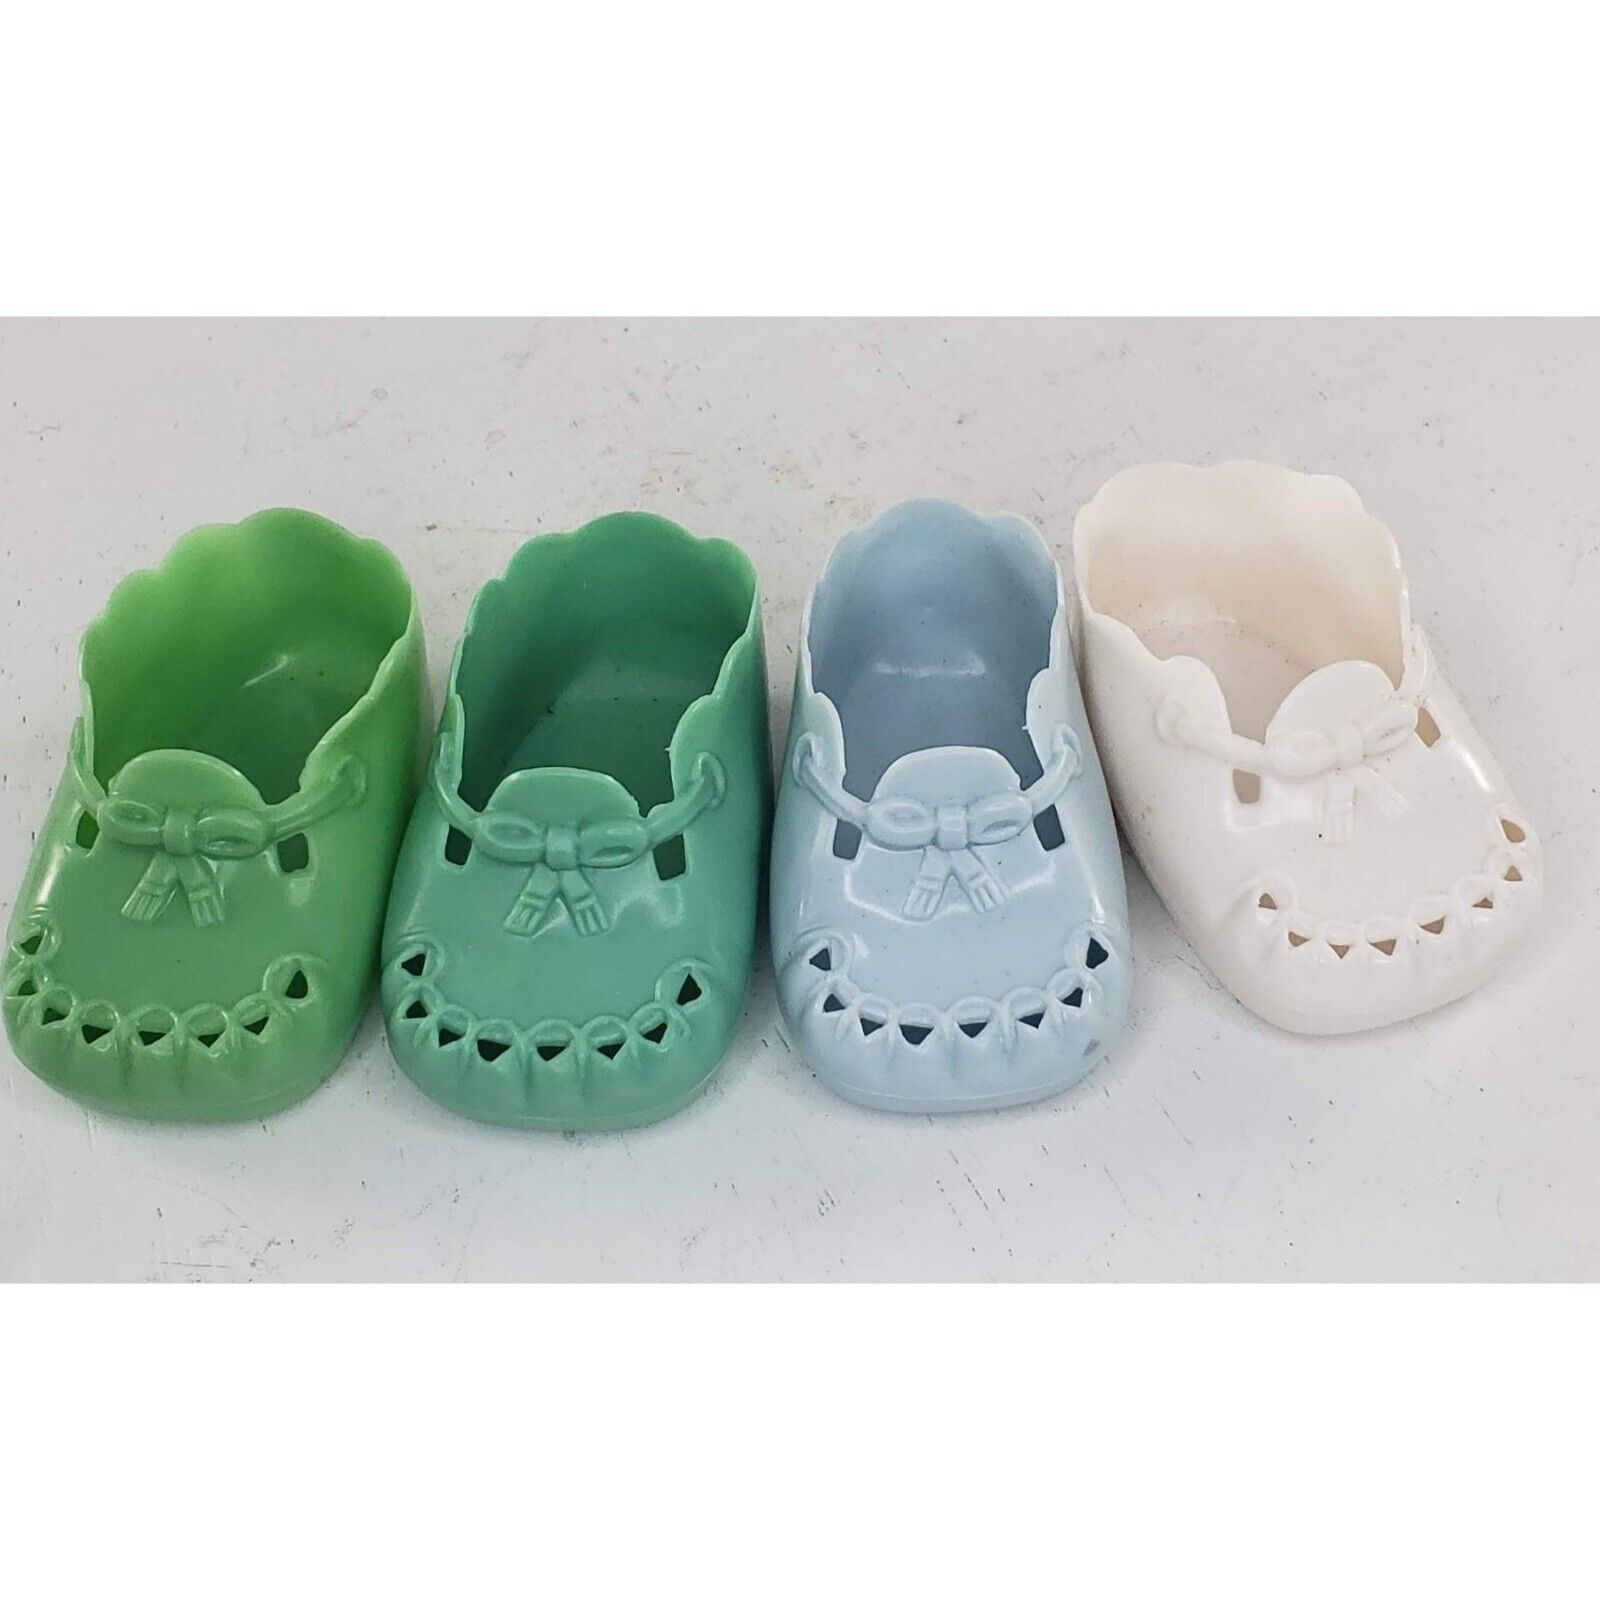 American Girl Doll Retired Bitty Baby Replacement Shoes 1997 - $19.99